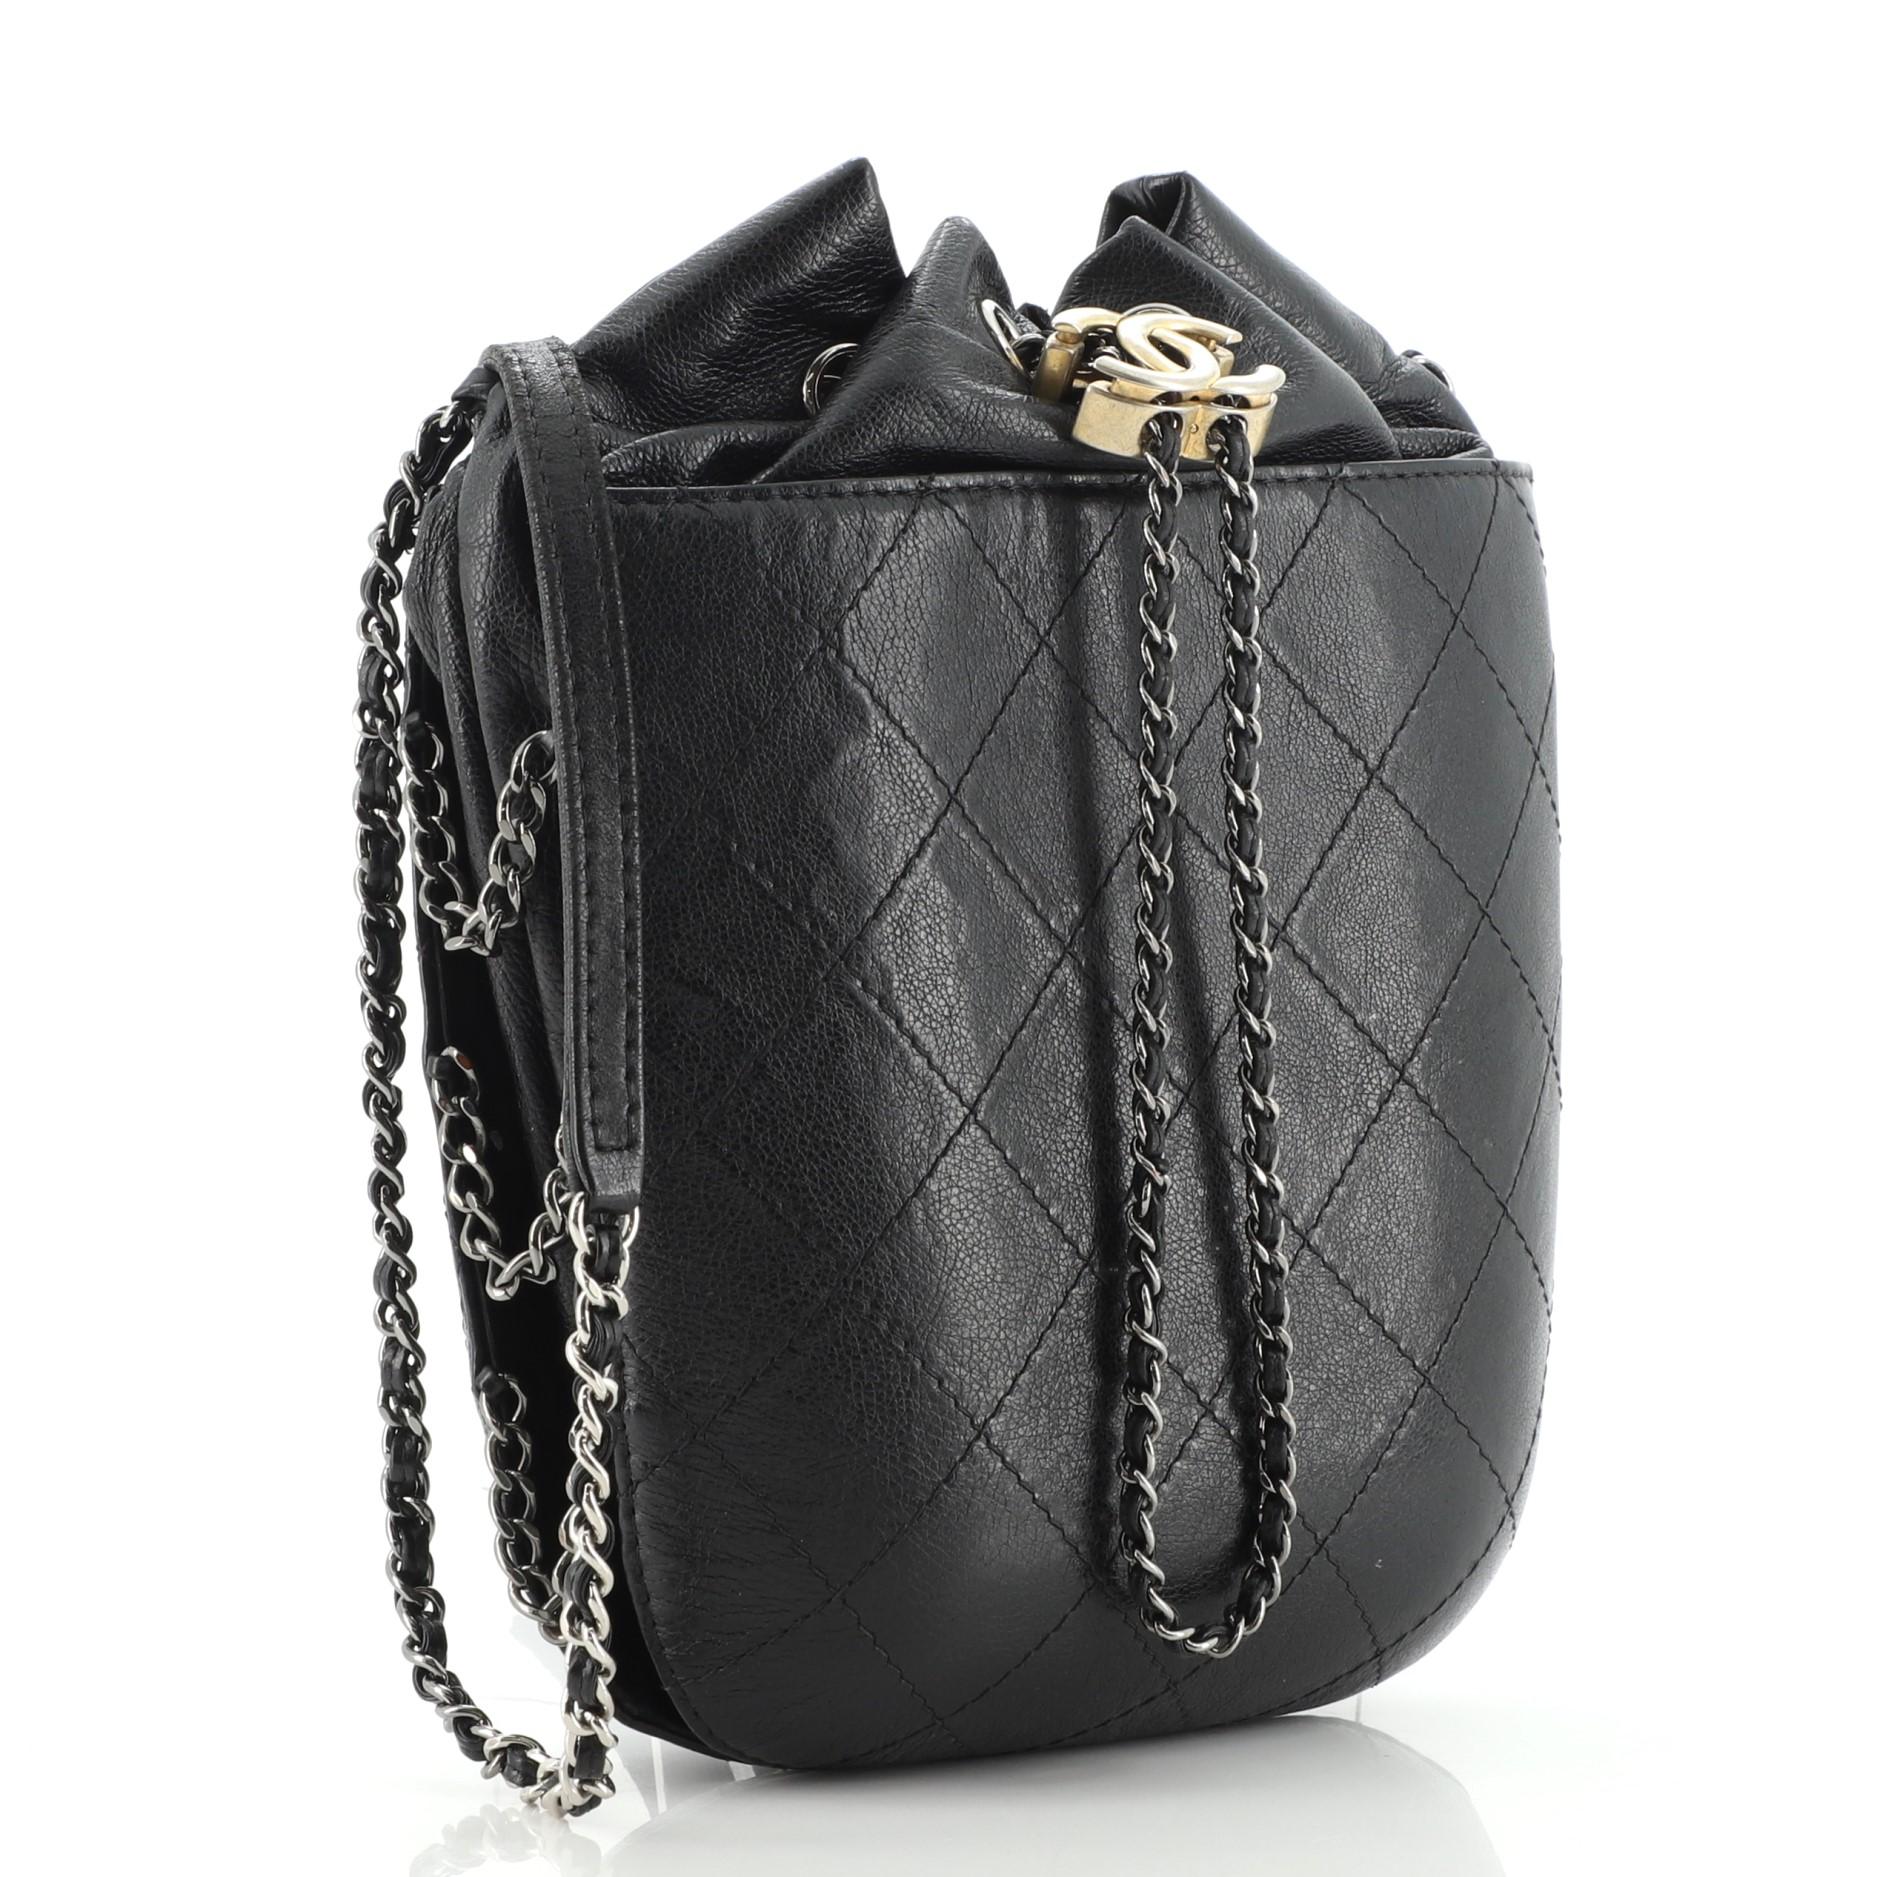 Chanel Black Quilted Leather Small Gabrielle Bucket Bag Chanel